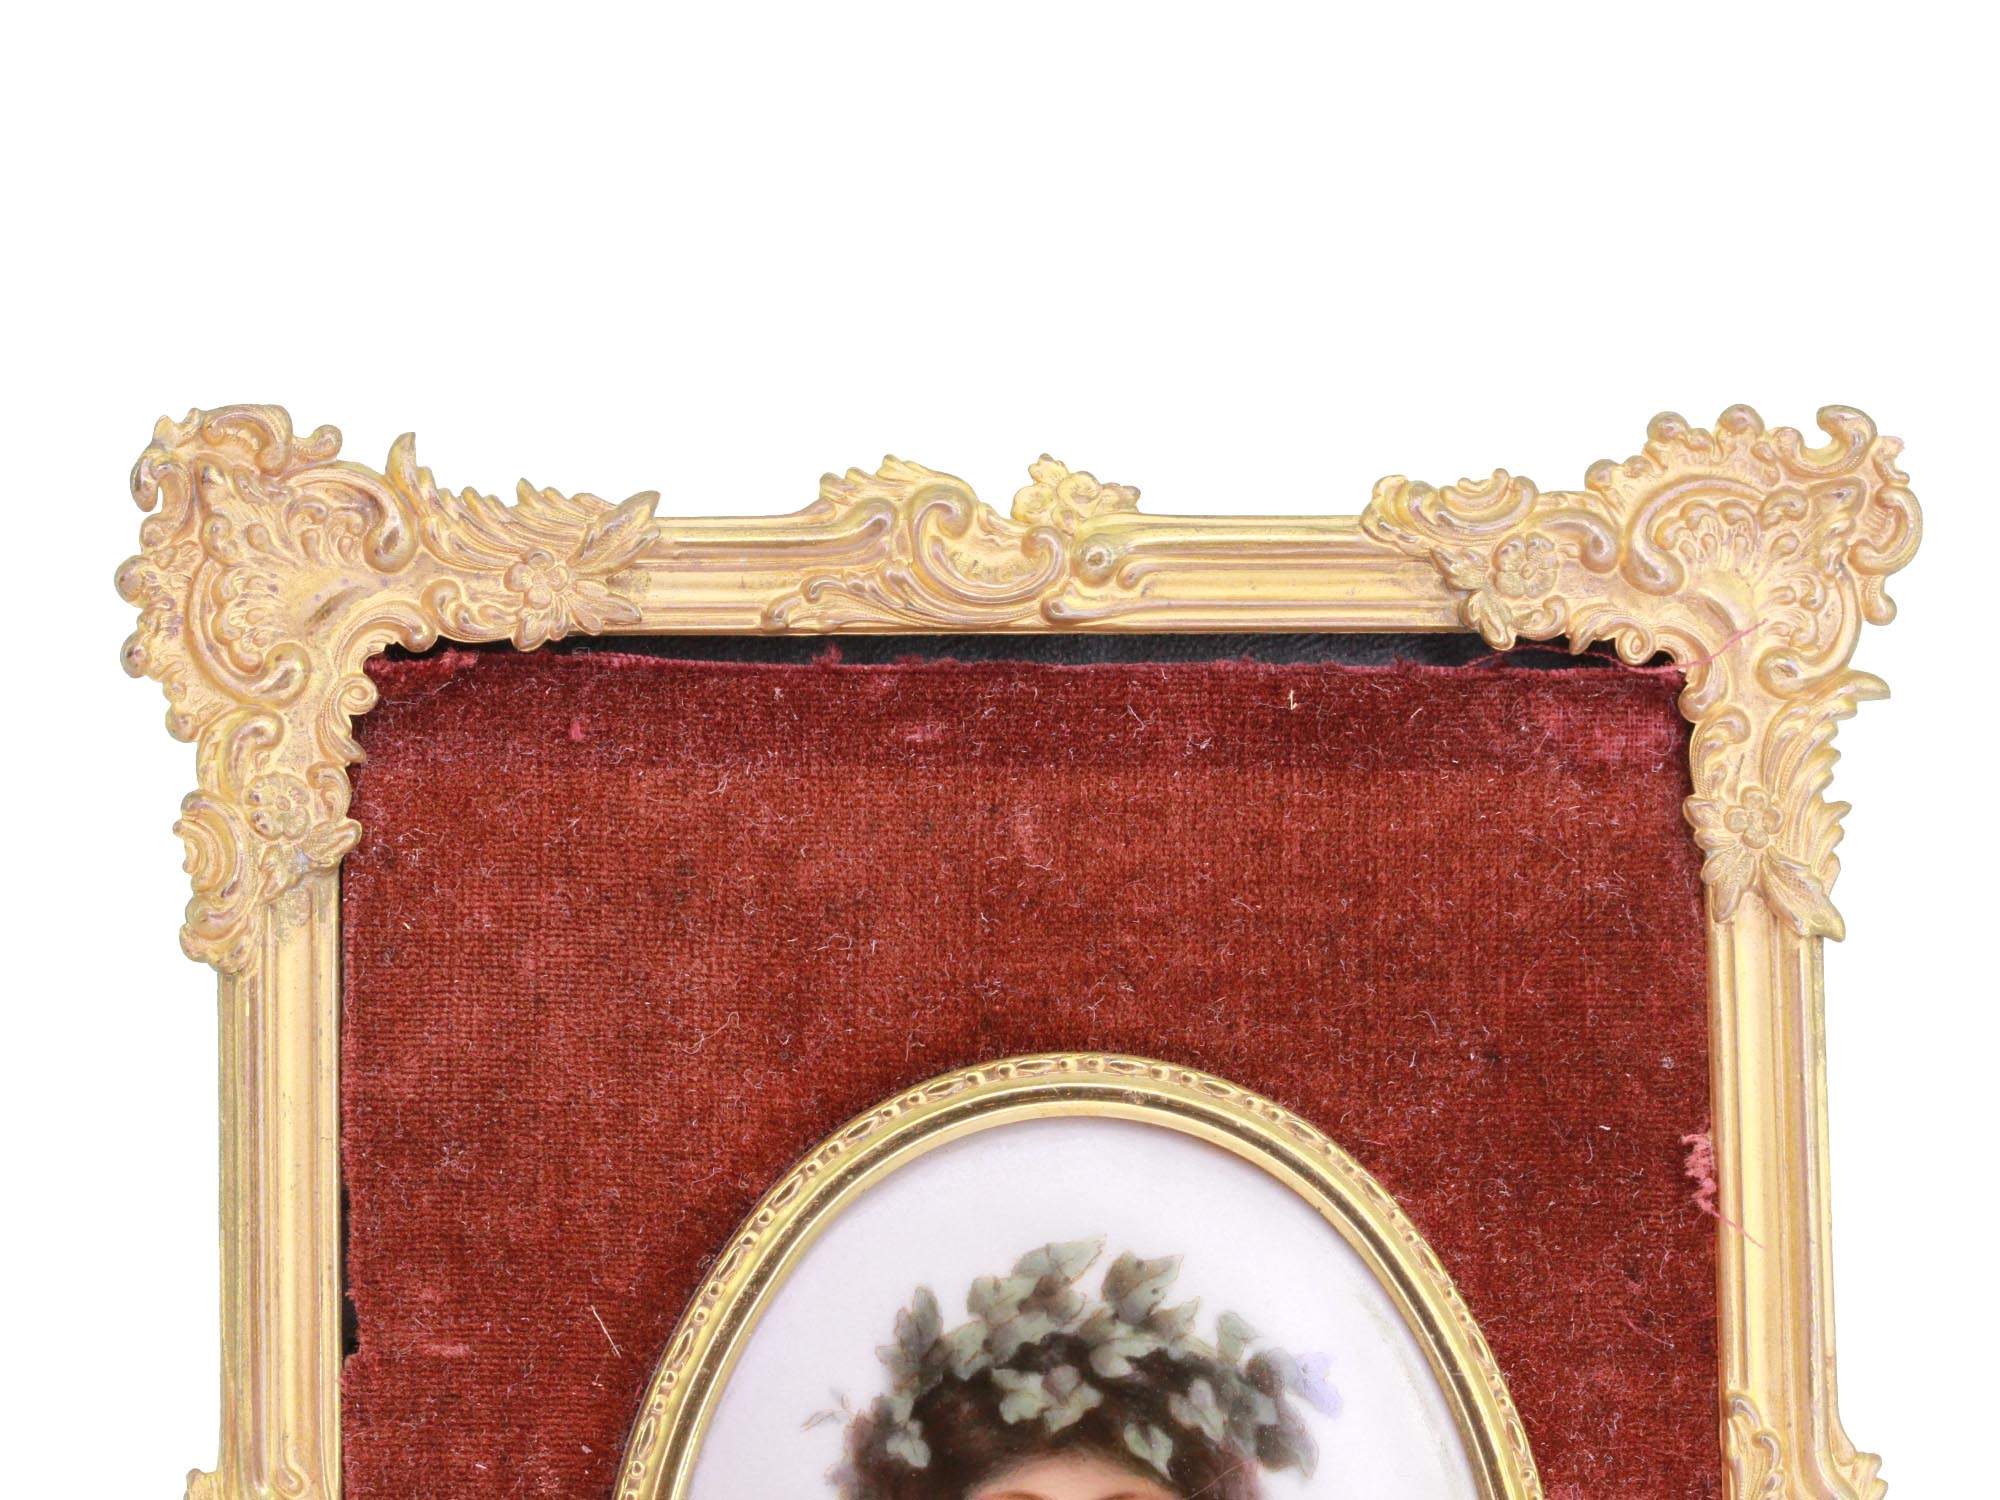 ANTIQUE 19TH C. FRENCH MINIATURE PAINTING MUSE PIC-6